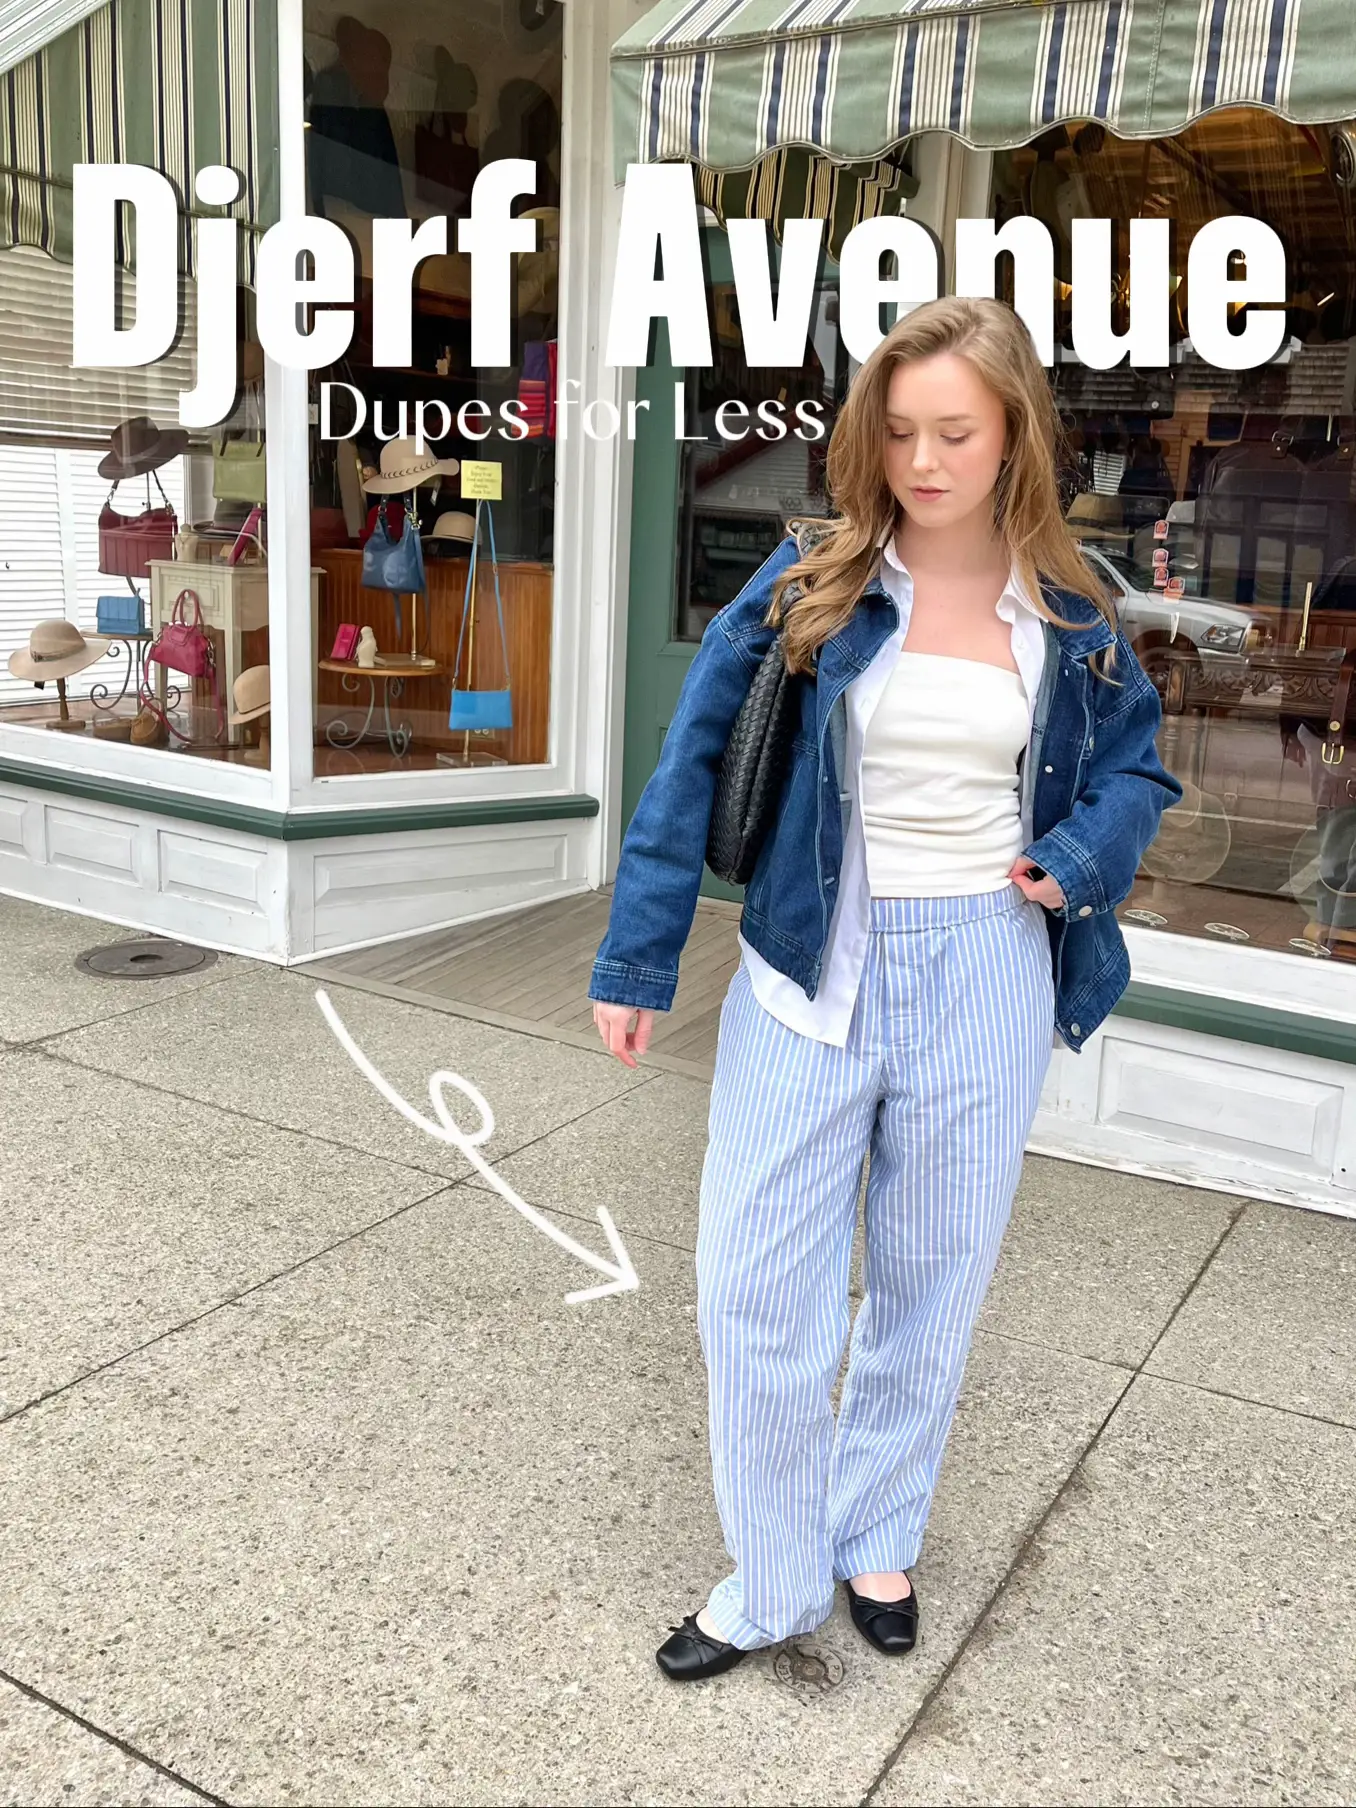 Djerf Avenue Breezy Pant Dupes  Gallery posted by Jessanotherday